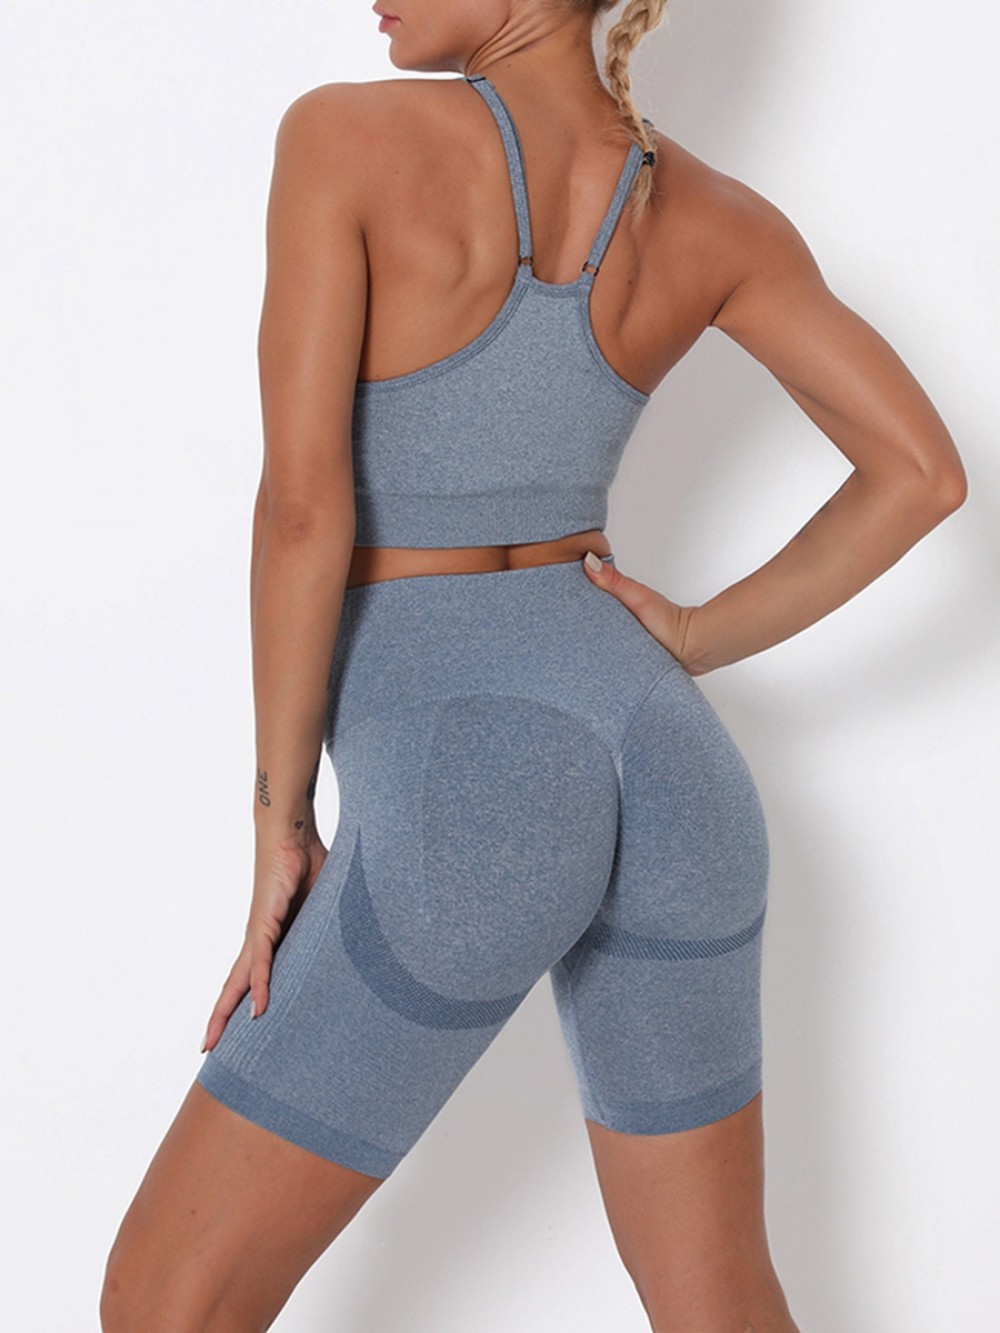 Blue Sports Suit Removable Padded High Rise Preventing